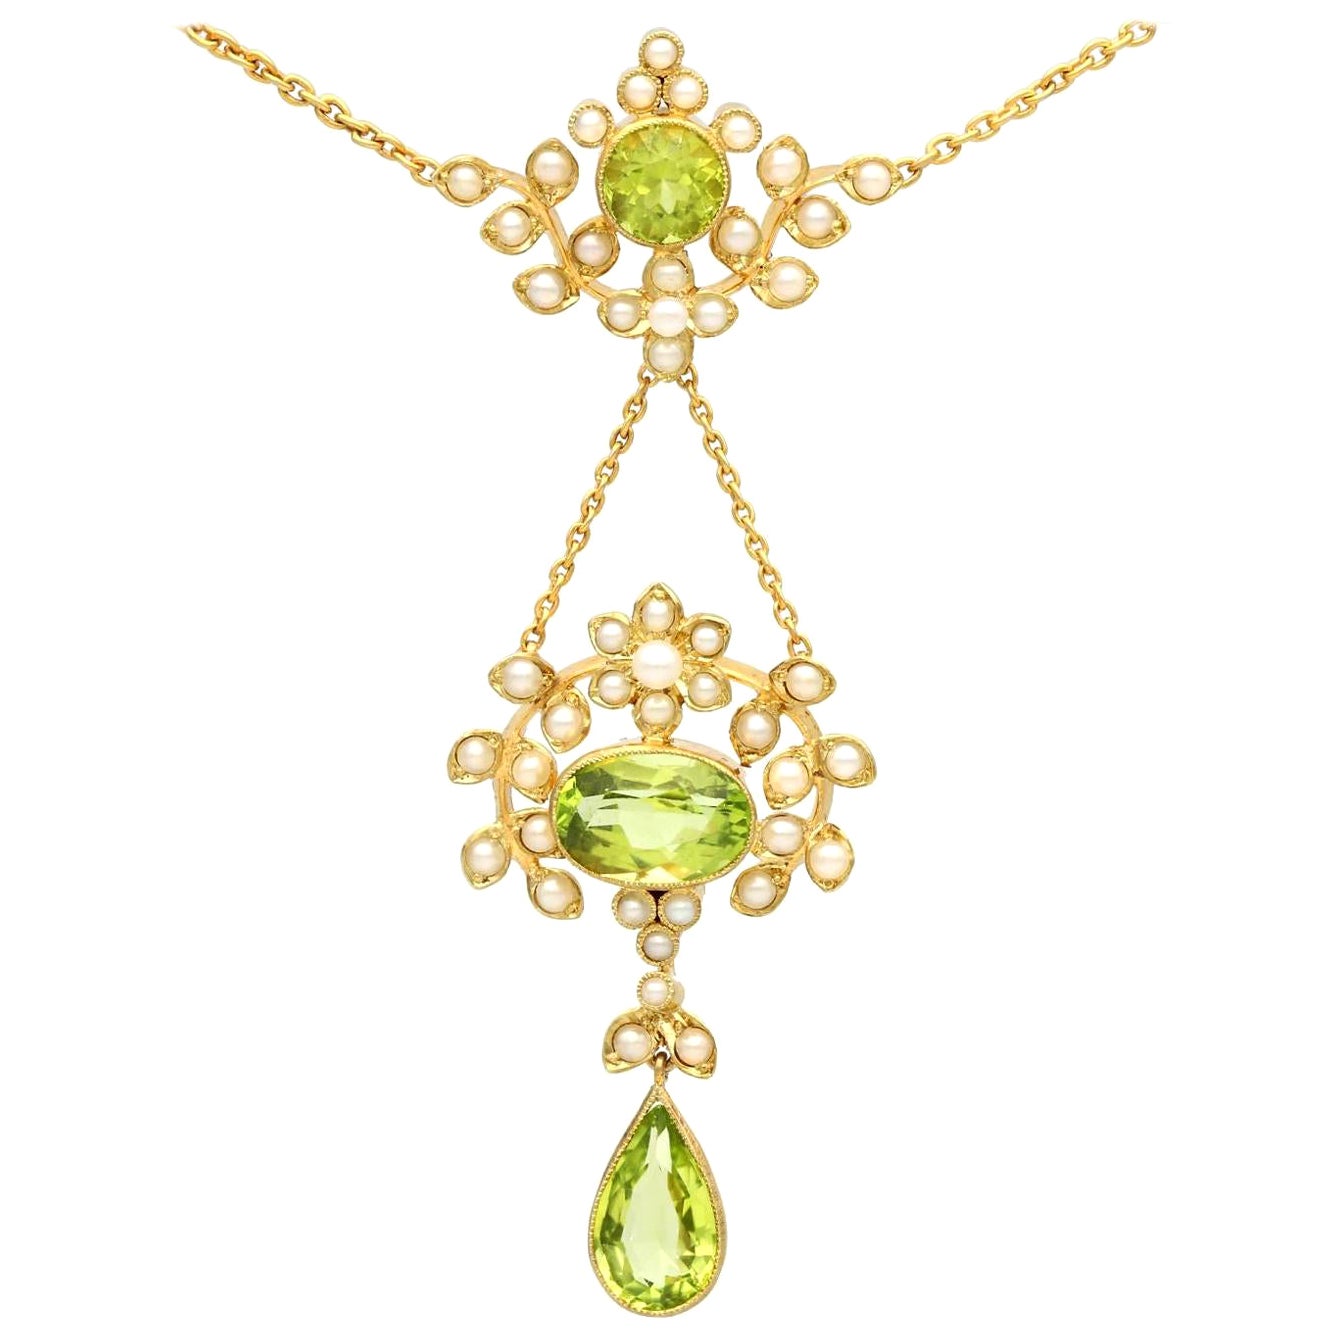 Antique Peridot Pendant in Yellow Gold | AC Silver